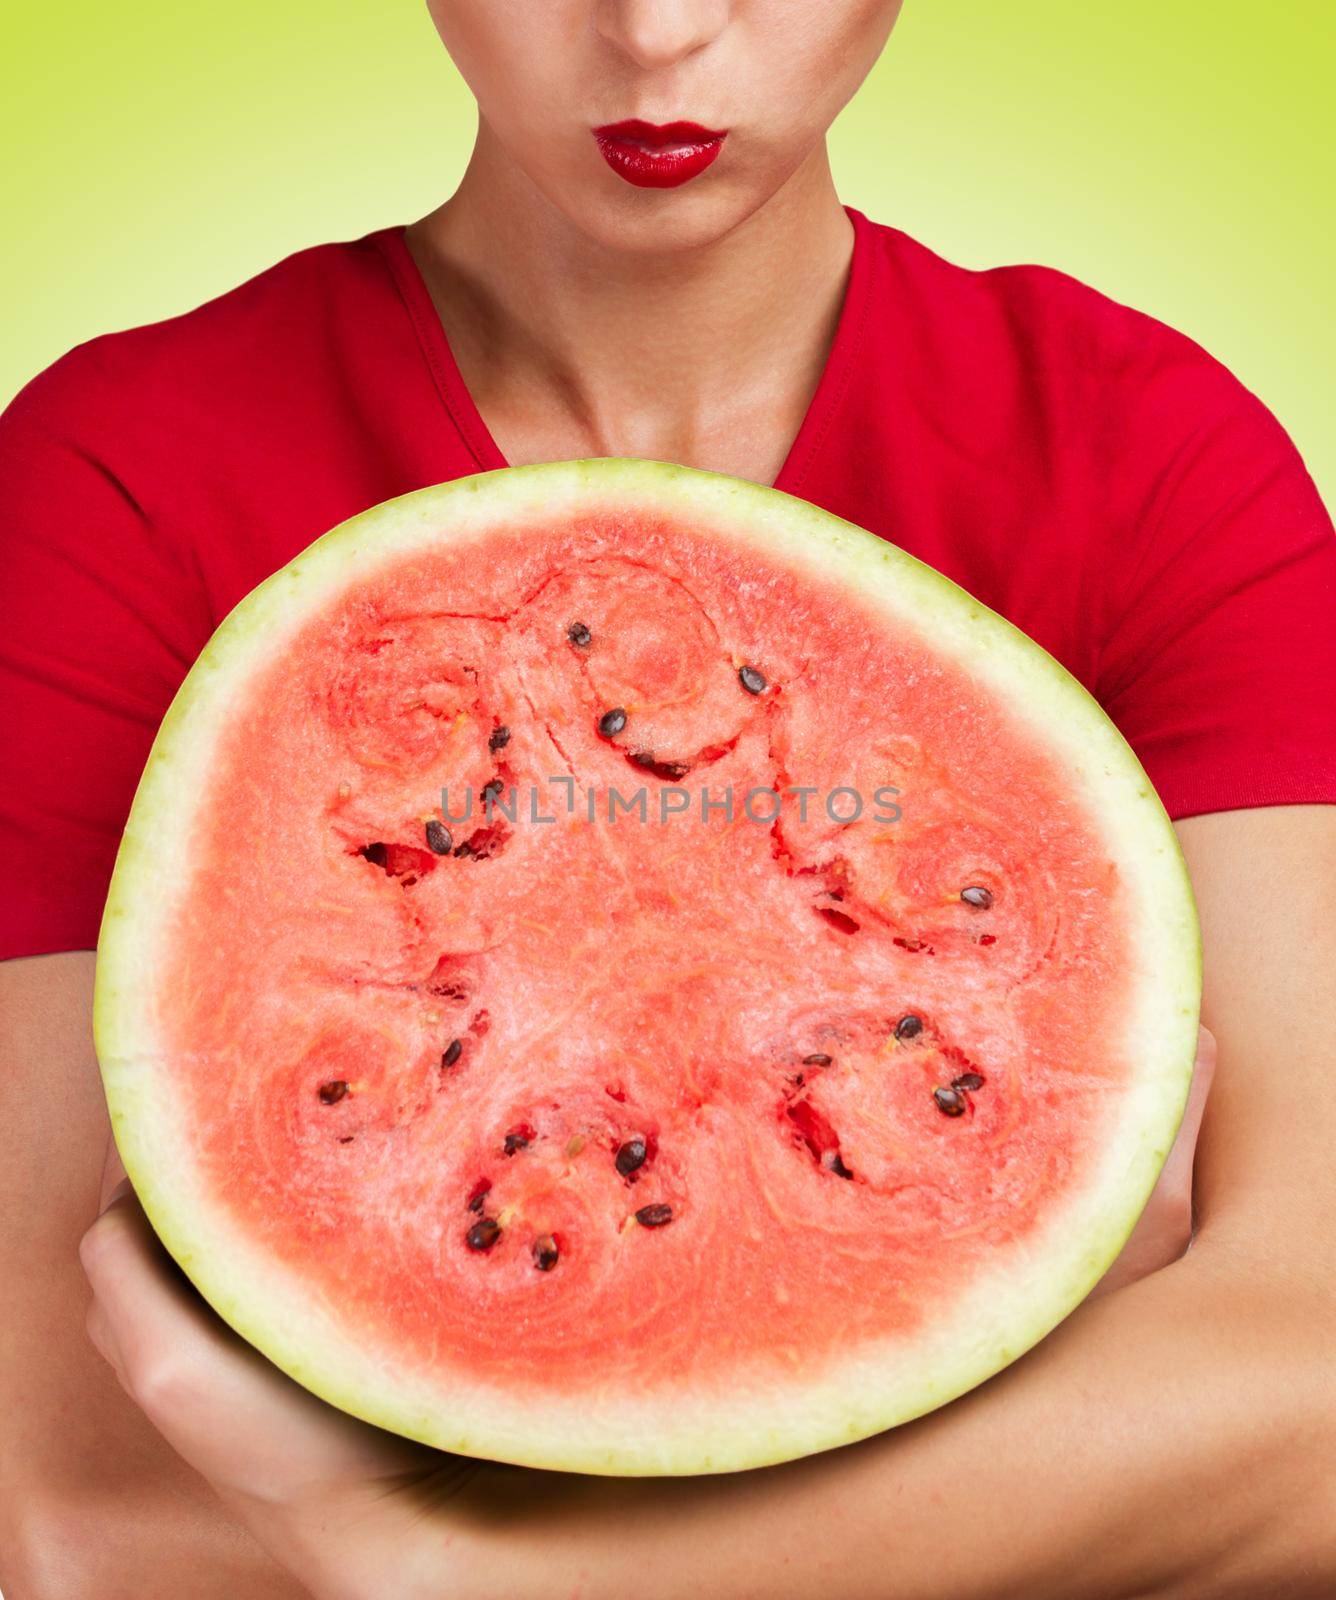 Young woman hugs a round half a watermelon